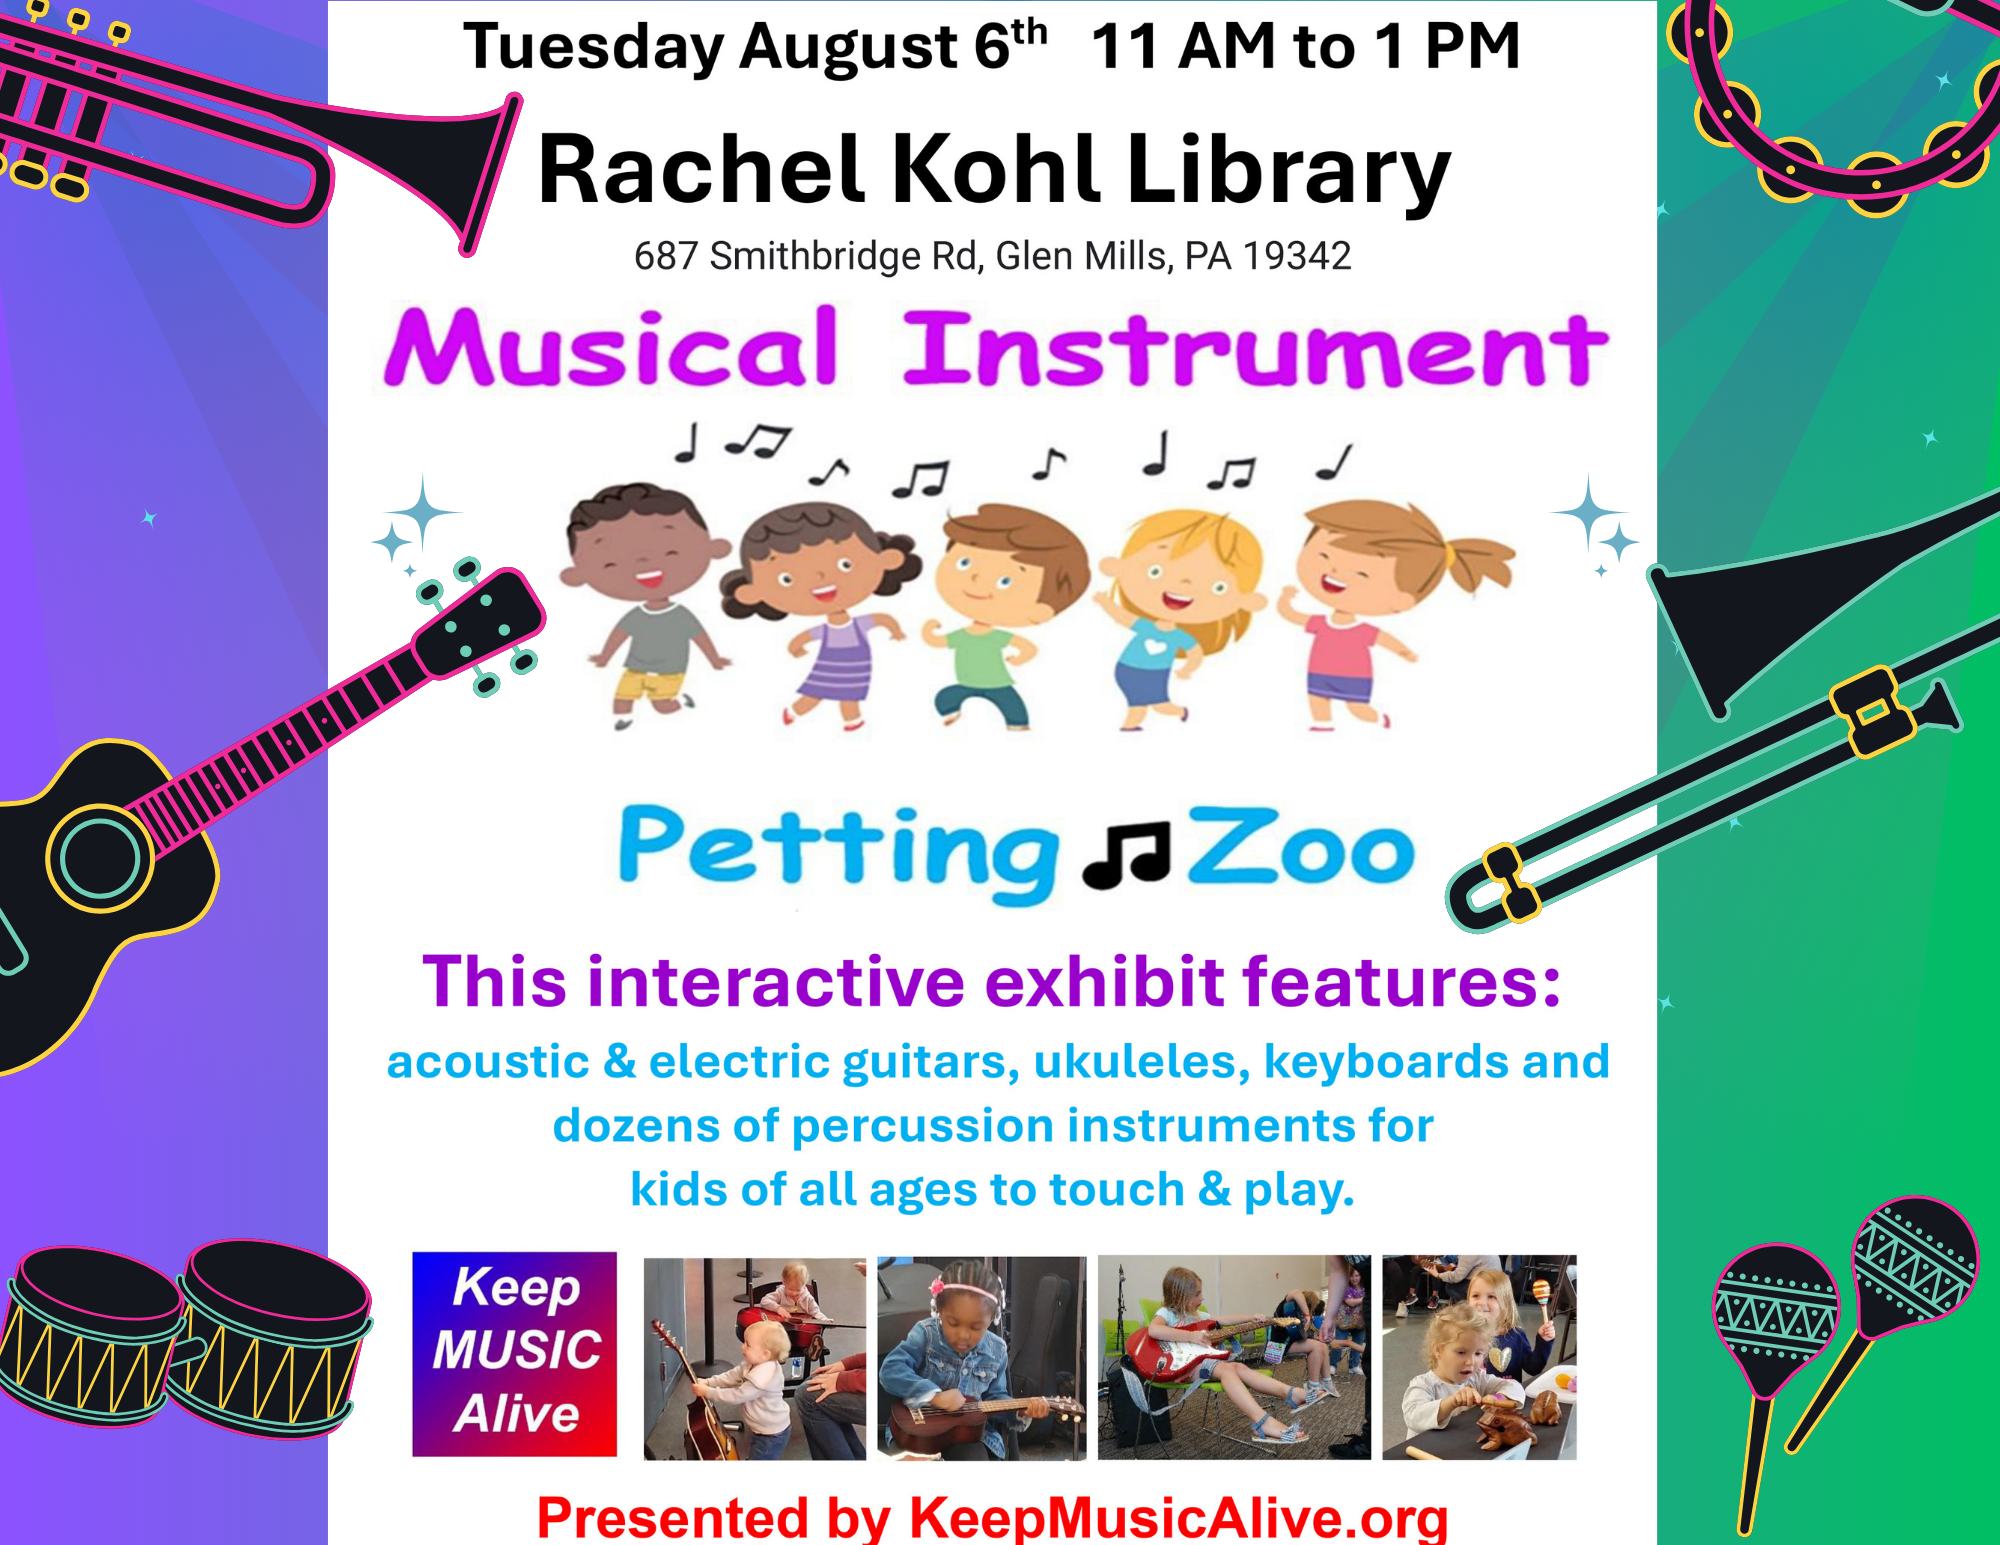 Musical Instrument Petting Zoo Aug. 6 11 AM - 1 PM